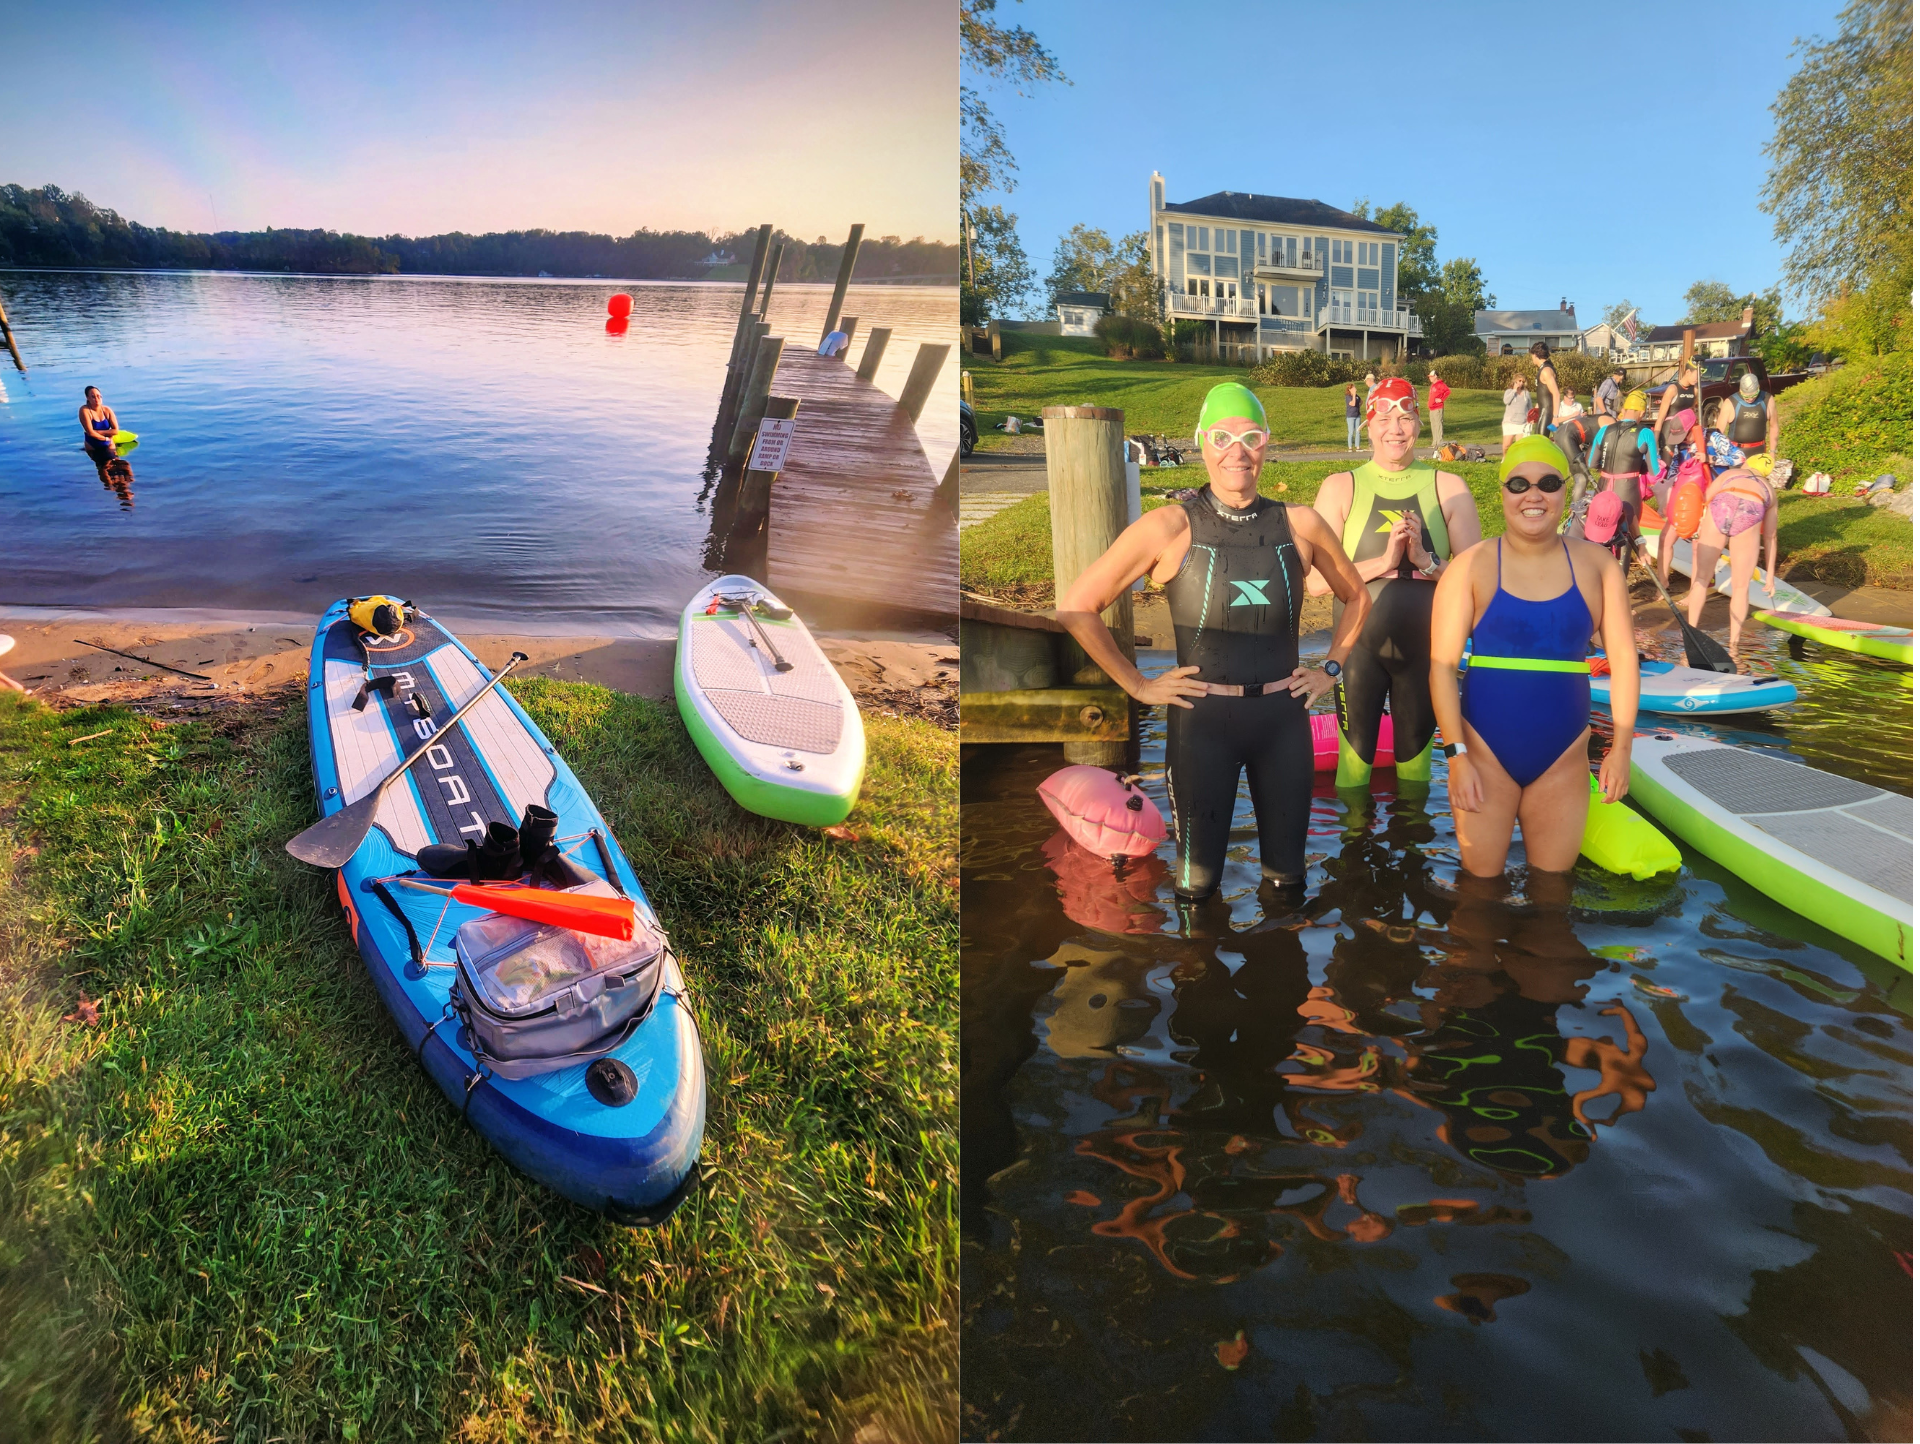 On the left, two paddle boards lay on the grass next to a dock. On the right, a group of swimmers prepare to enter the water.